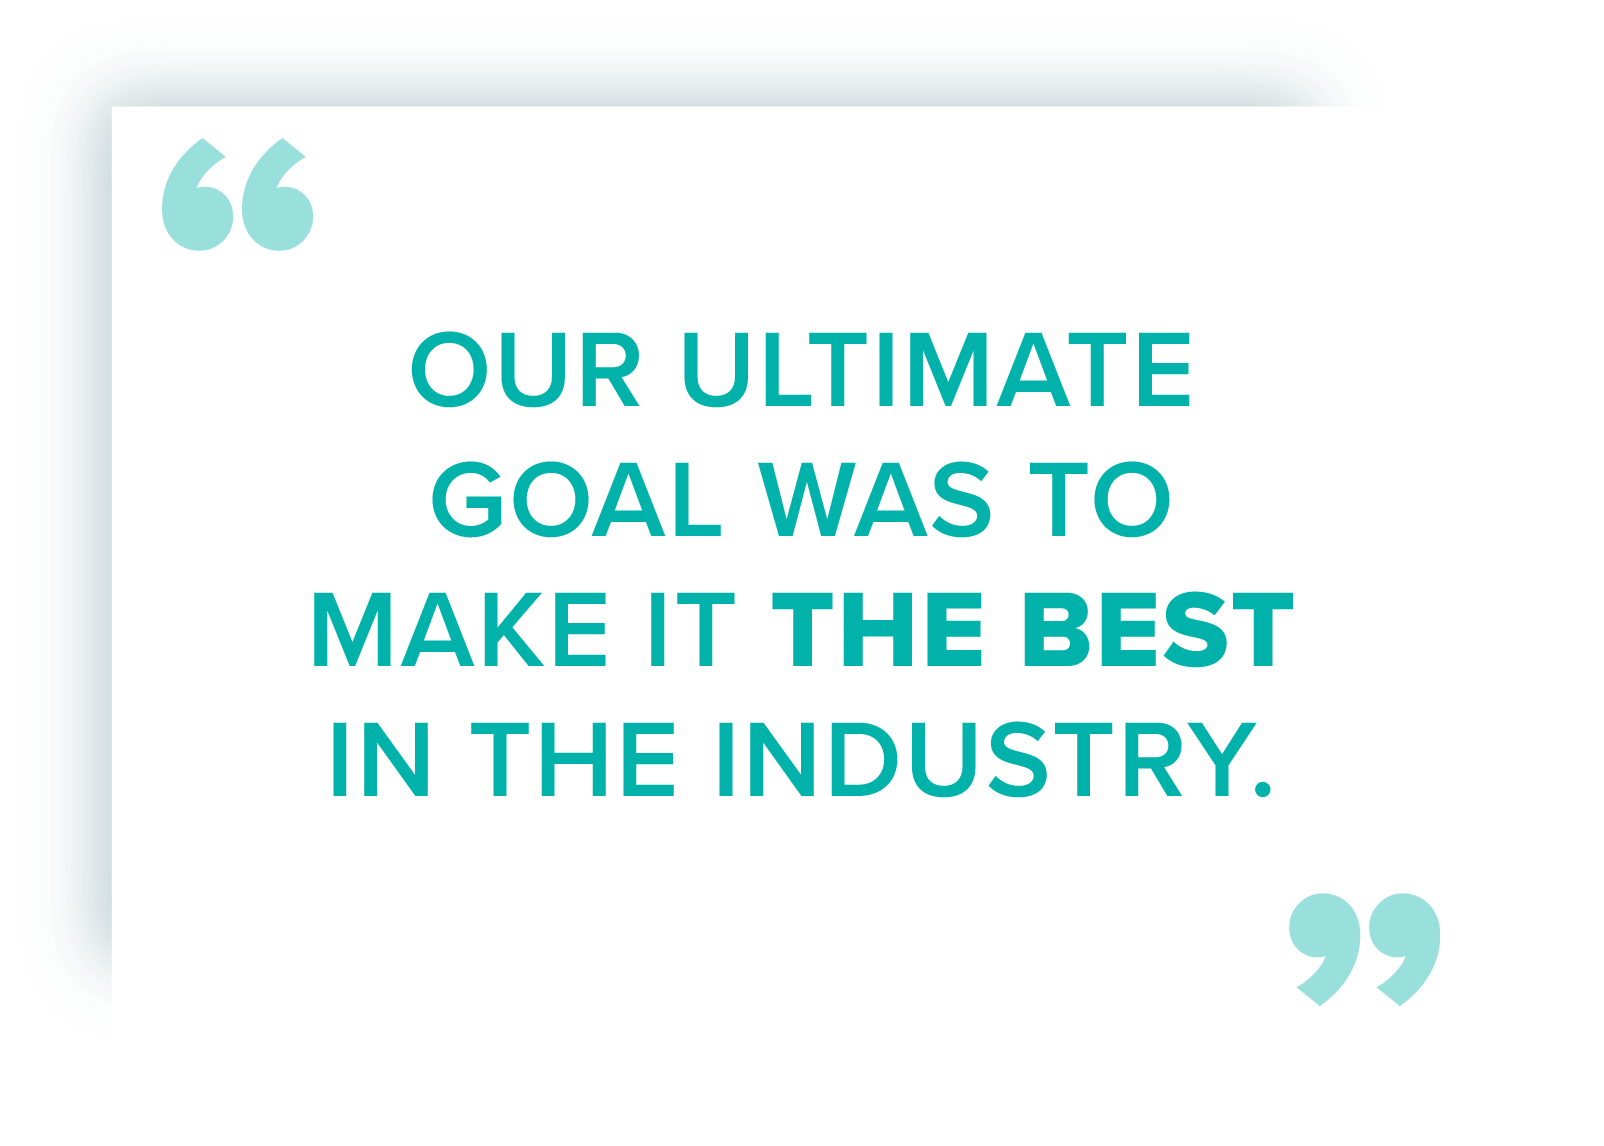 Our Goal Was To Make It The Best in The Industry